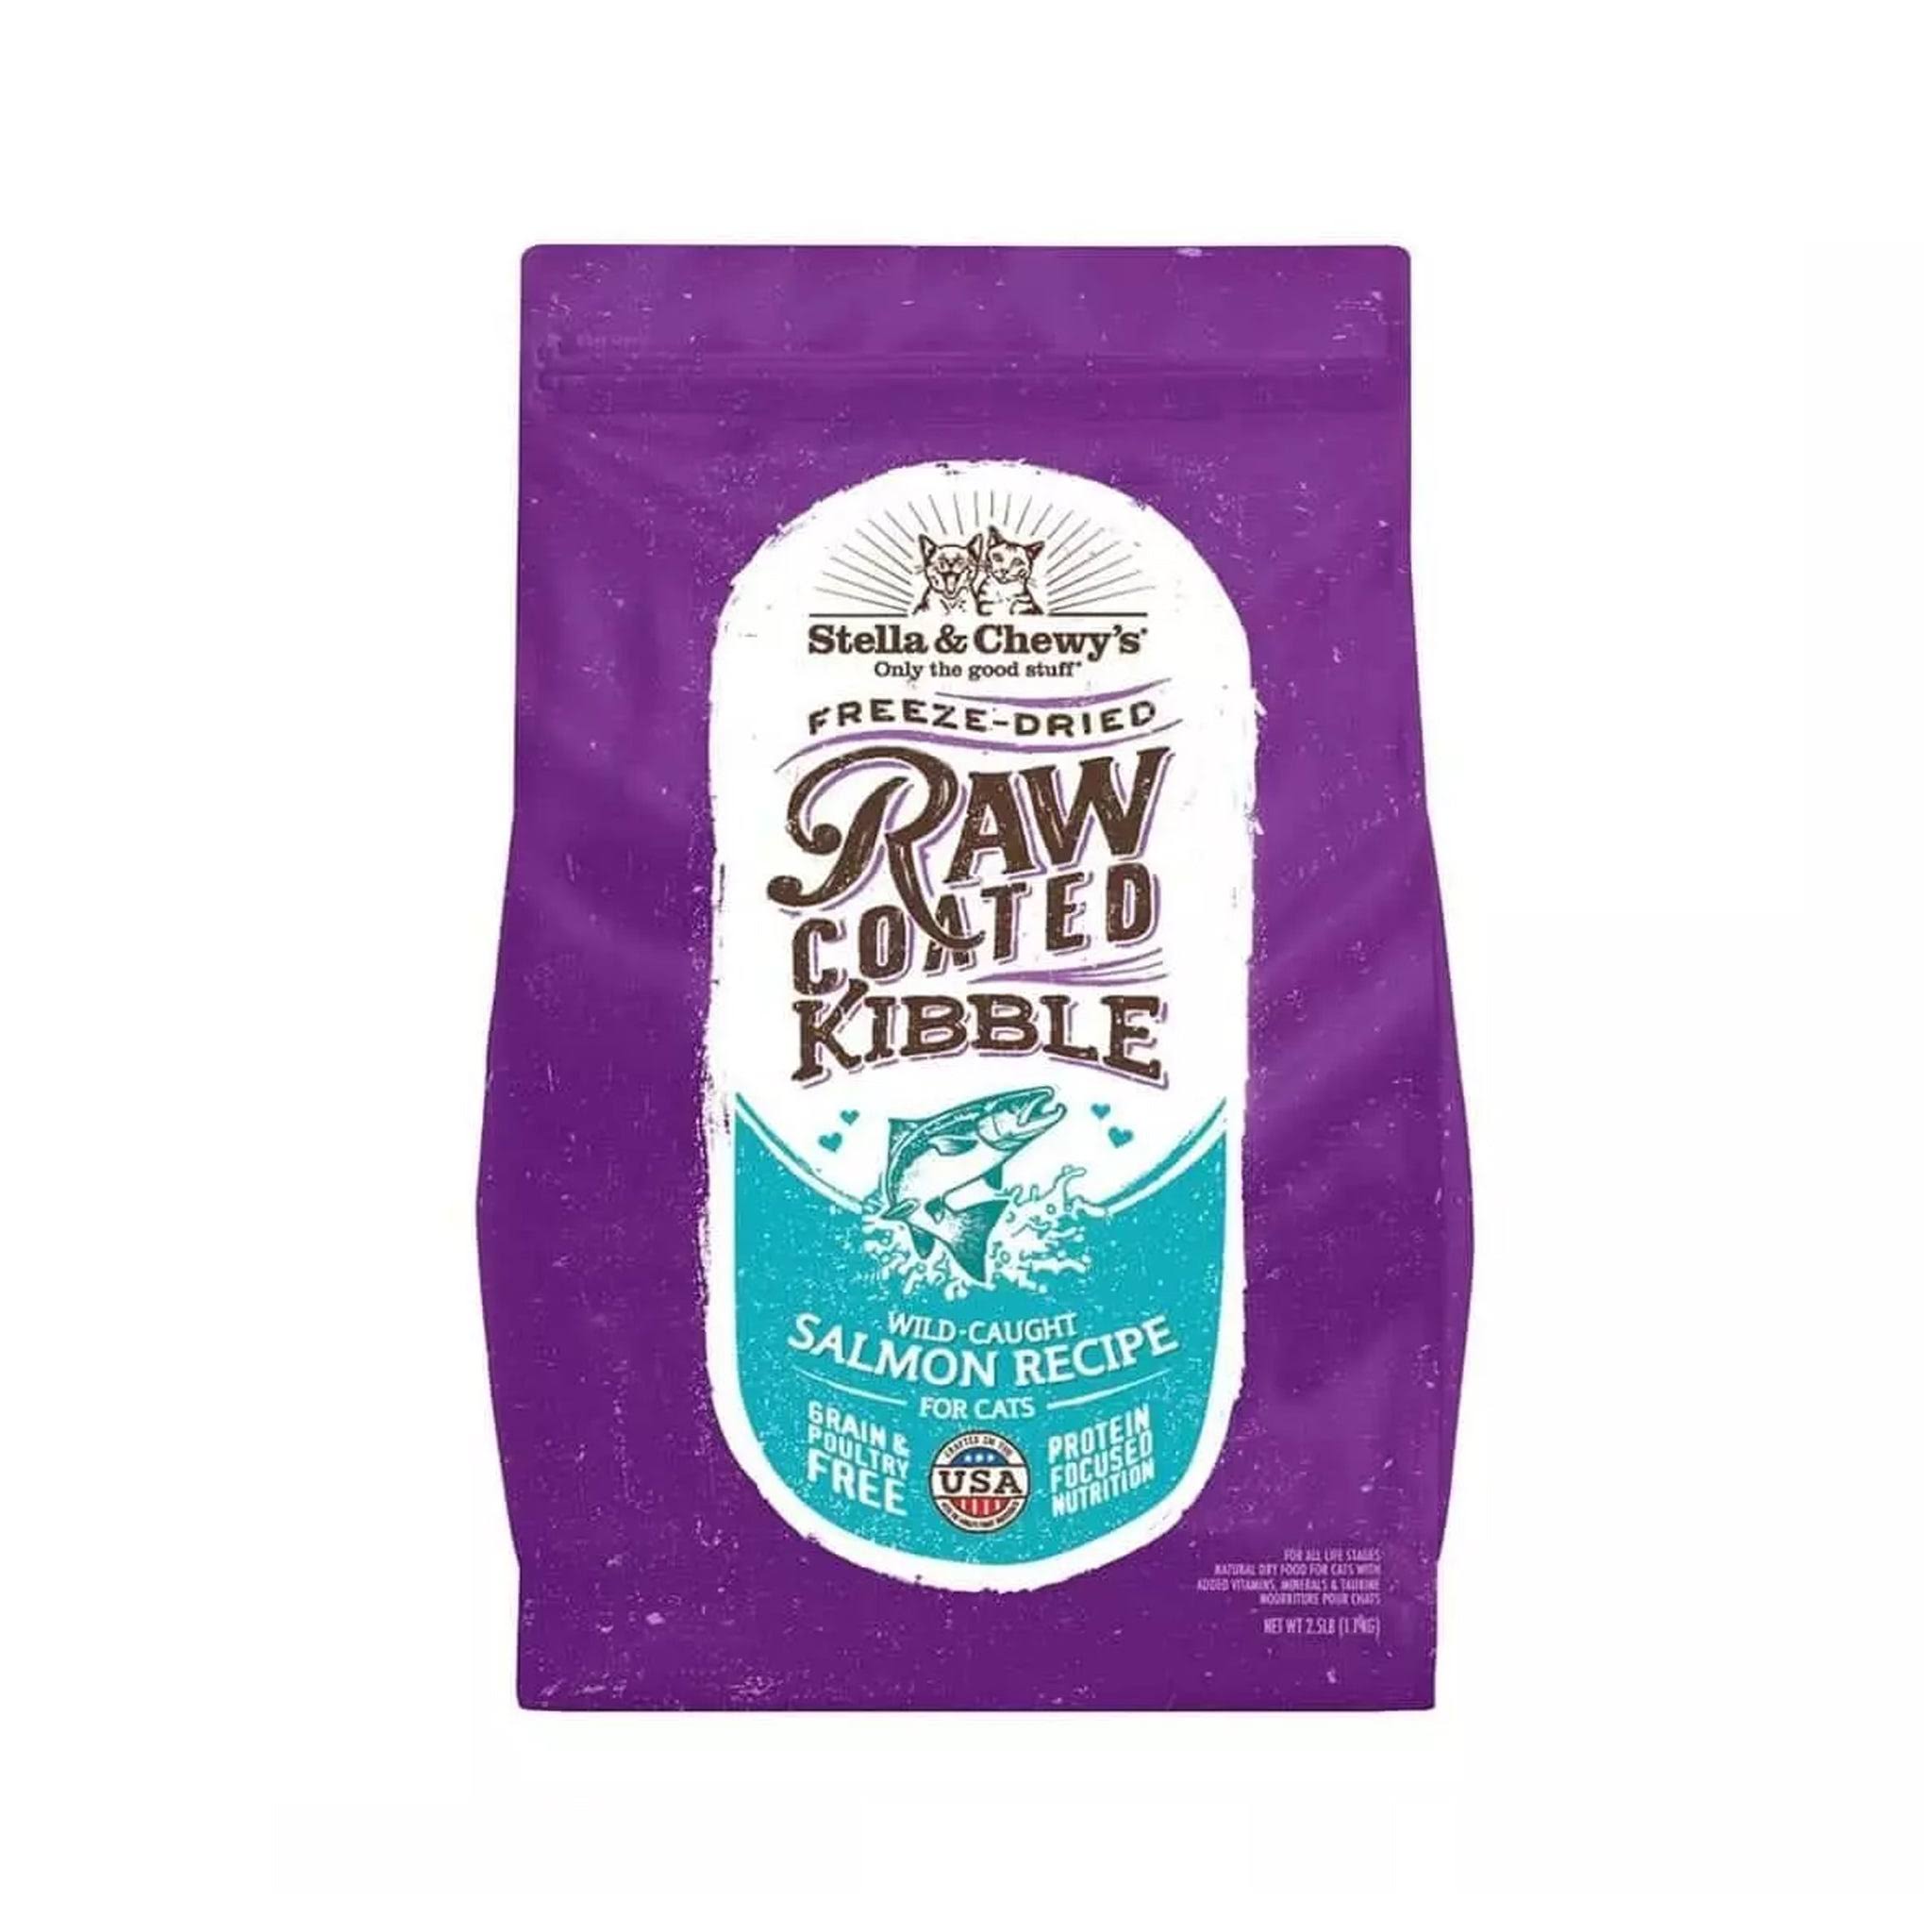 Stella & Chewy's Raw Coated Kibble Wild Caught Salmon Recipe Dry Cat Food 10 lbs